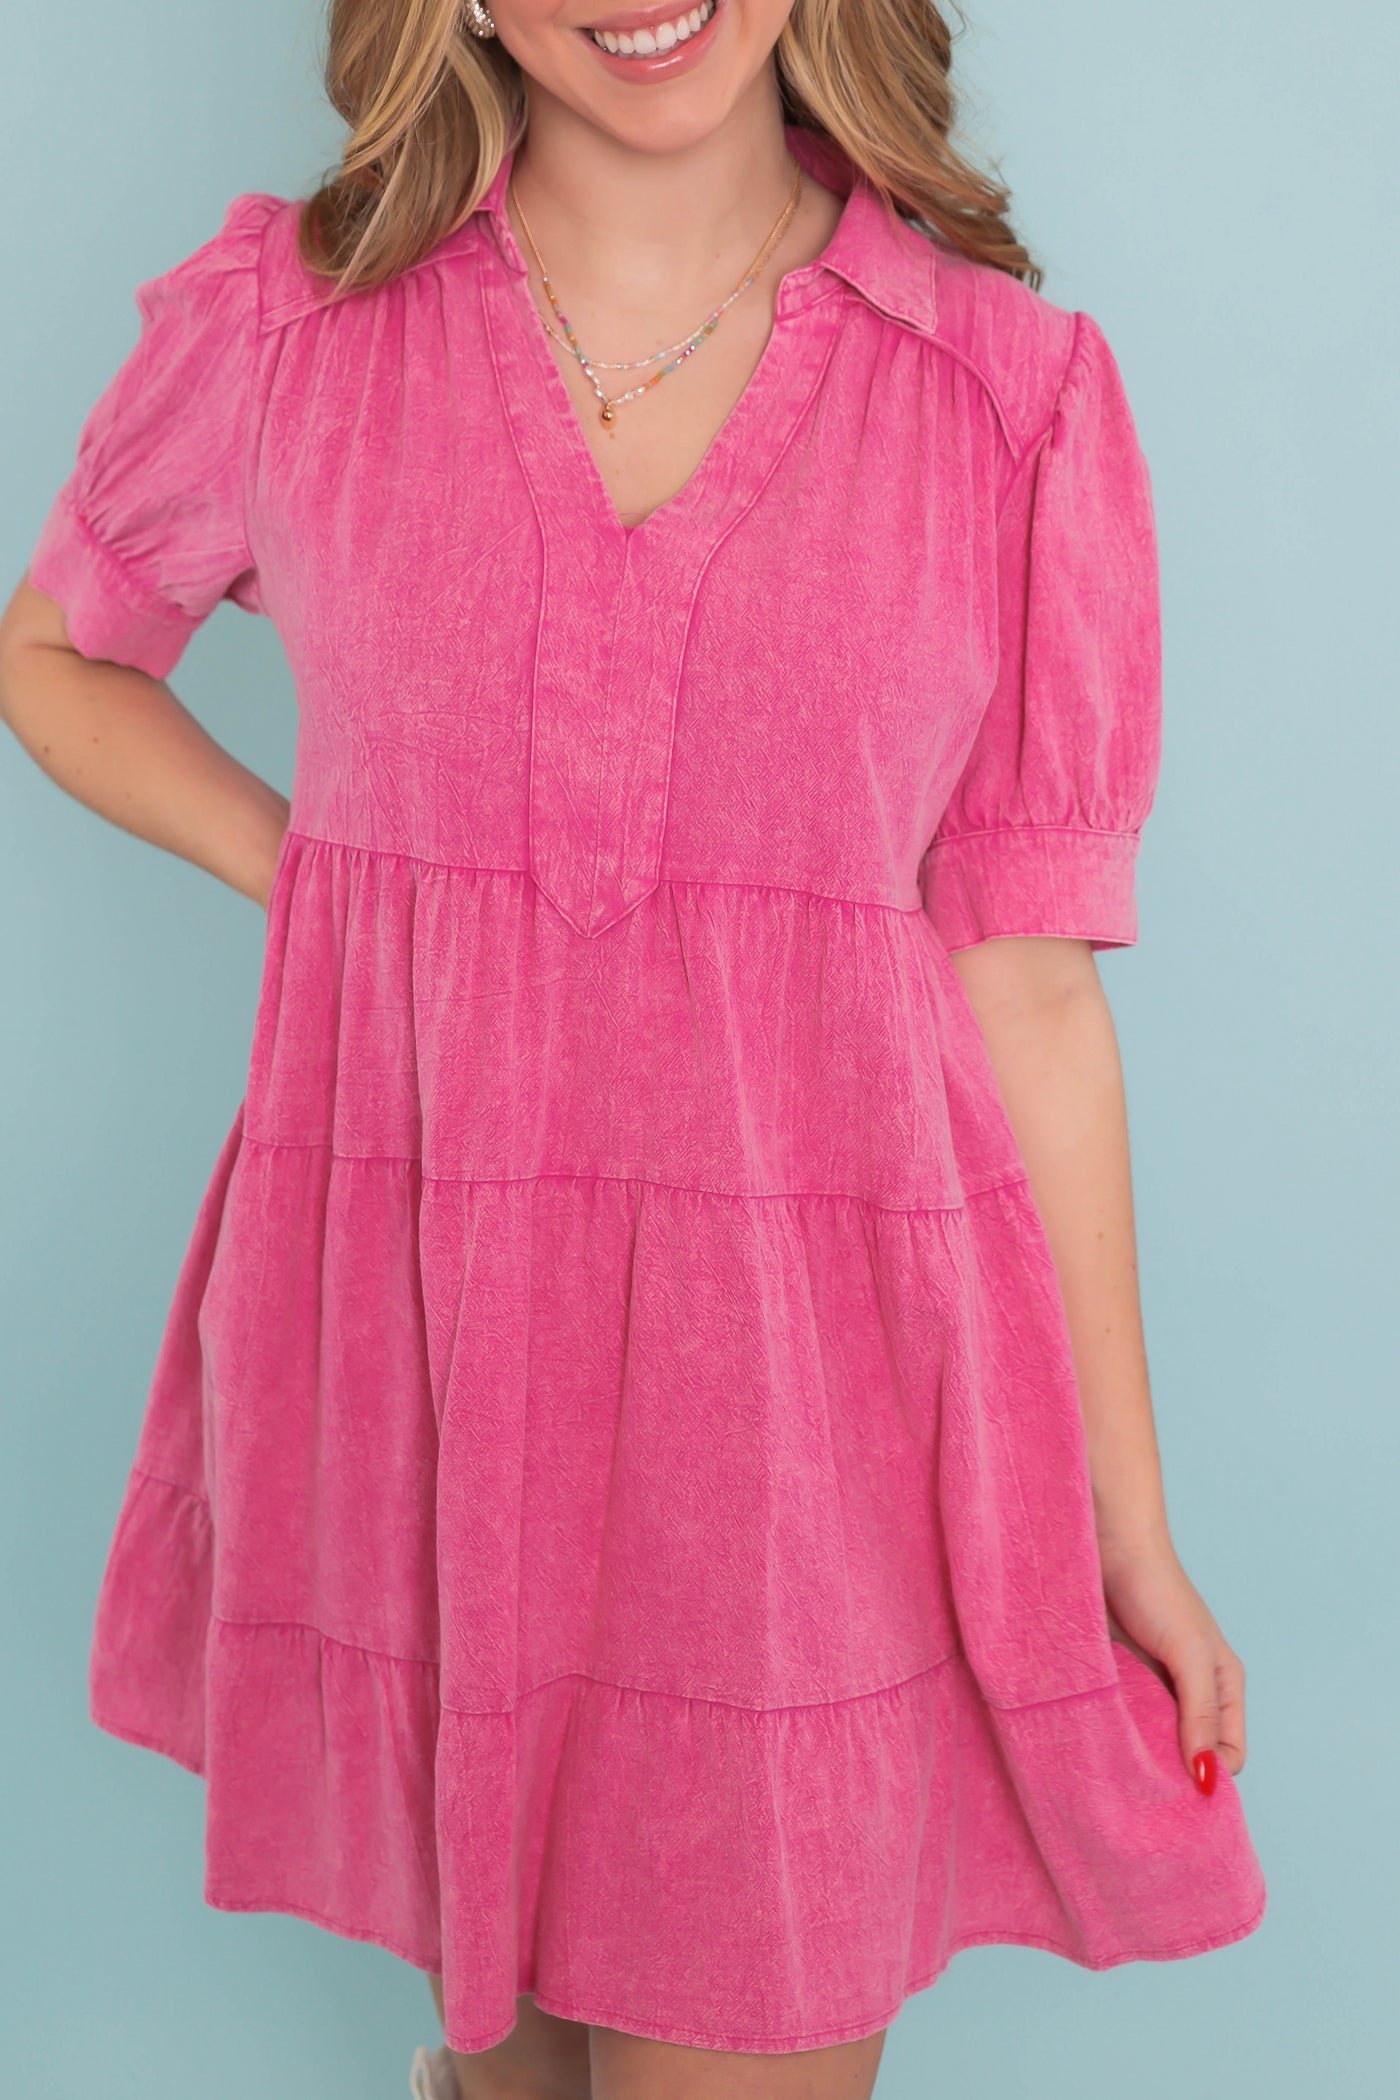 Mineral Wash Tiered Dress- Women's Oversized Dress- Women's Vacation Dresses